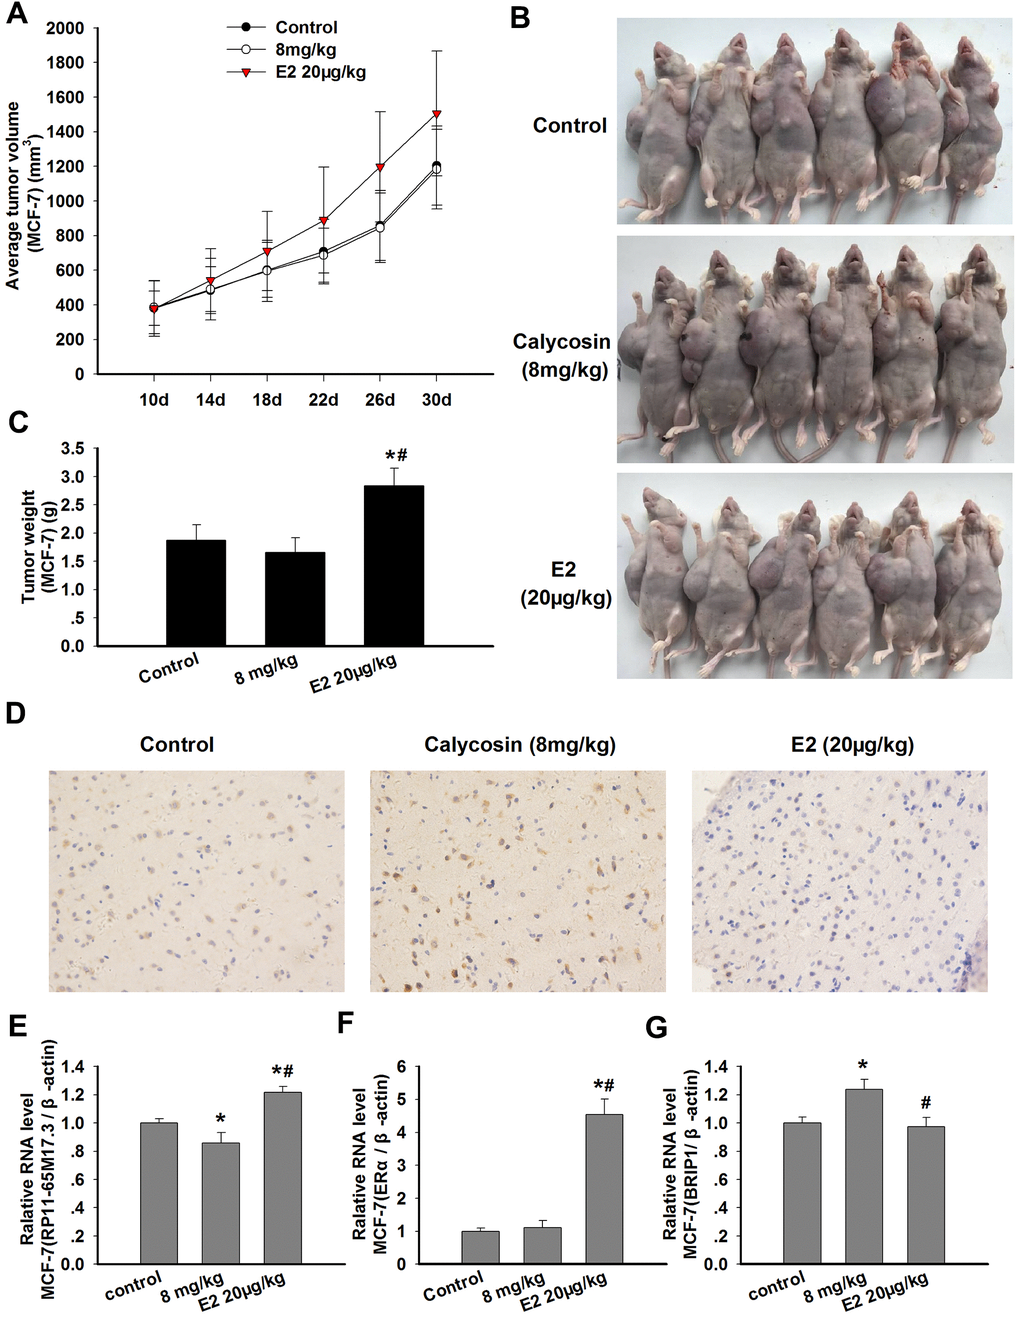 Effects of calycosin on xenograft tumor growth and the expression levels of RP11-65M17.3, ERα and BRIP1 in tumor tissue. (A–C) Nude mice bearing MCF-7-xenografted were treated for 20 days with calycosin (0 or 8 mg/kg) and 20 μg/kg E2. The tumor volume and tumor weight of the MCF-7 xenografts were measured (n = 6). (D) The tumor samples were subjected to IHC staining for BRIP1. (E–G) The mRNA expression levels of RP11-65M17.3, ERα and BRIP1 in the tumor tissues were determined using qRT-PCR, and β-actin served as the control. Representative data from three independent experiments are shown. *p #p 